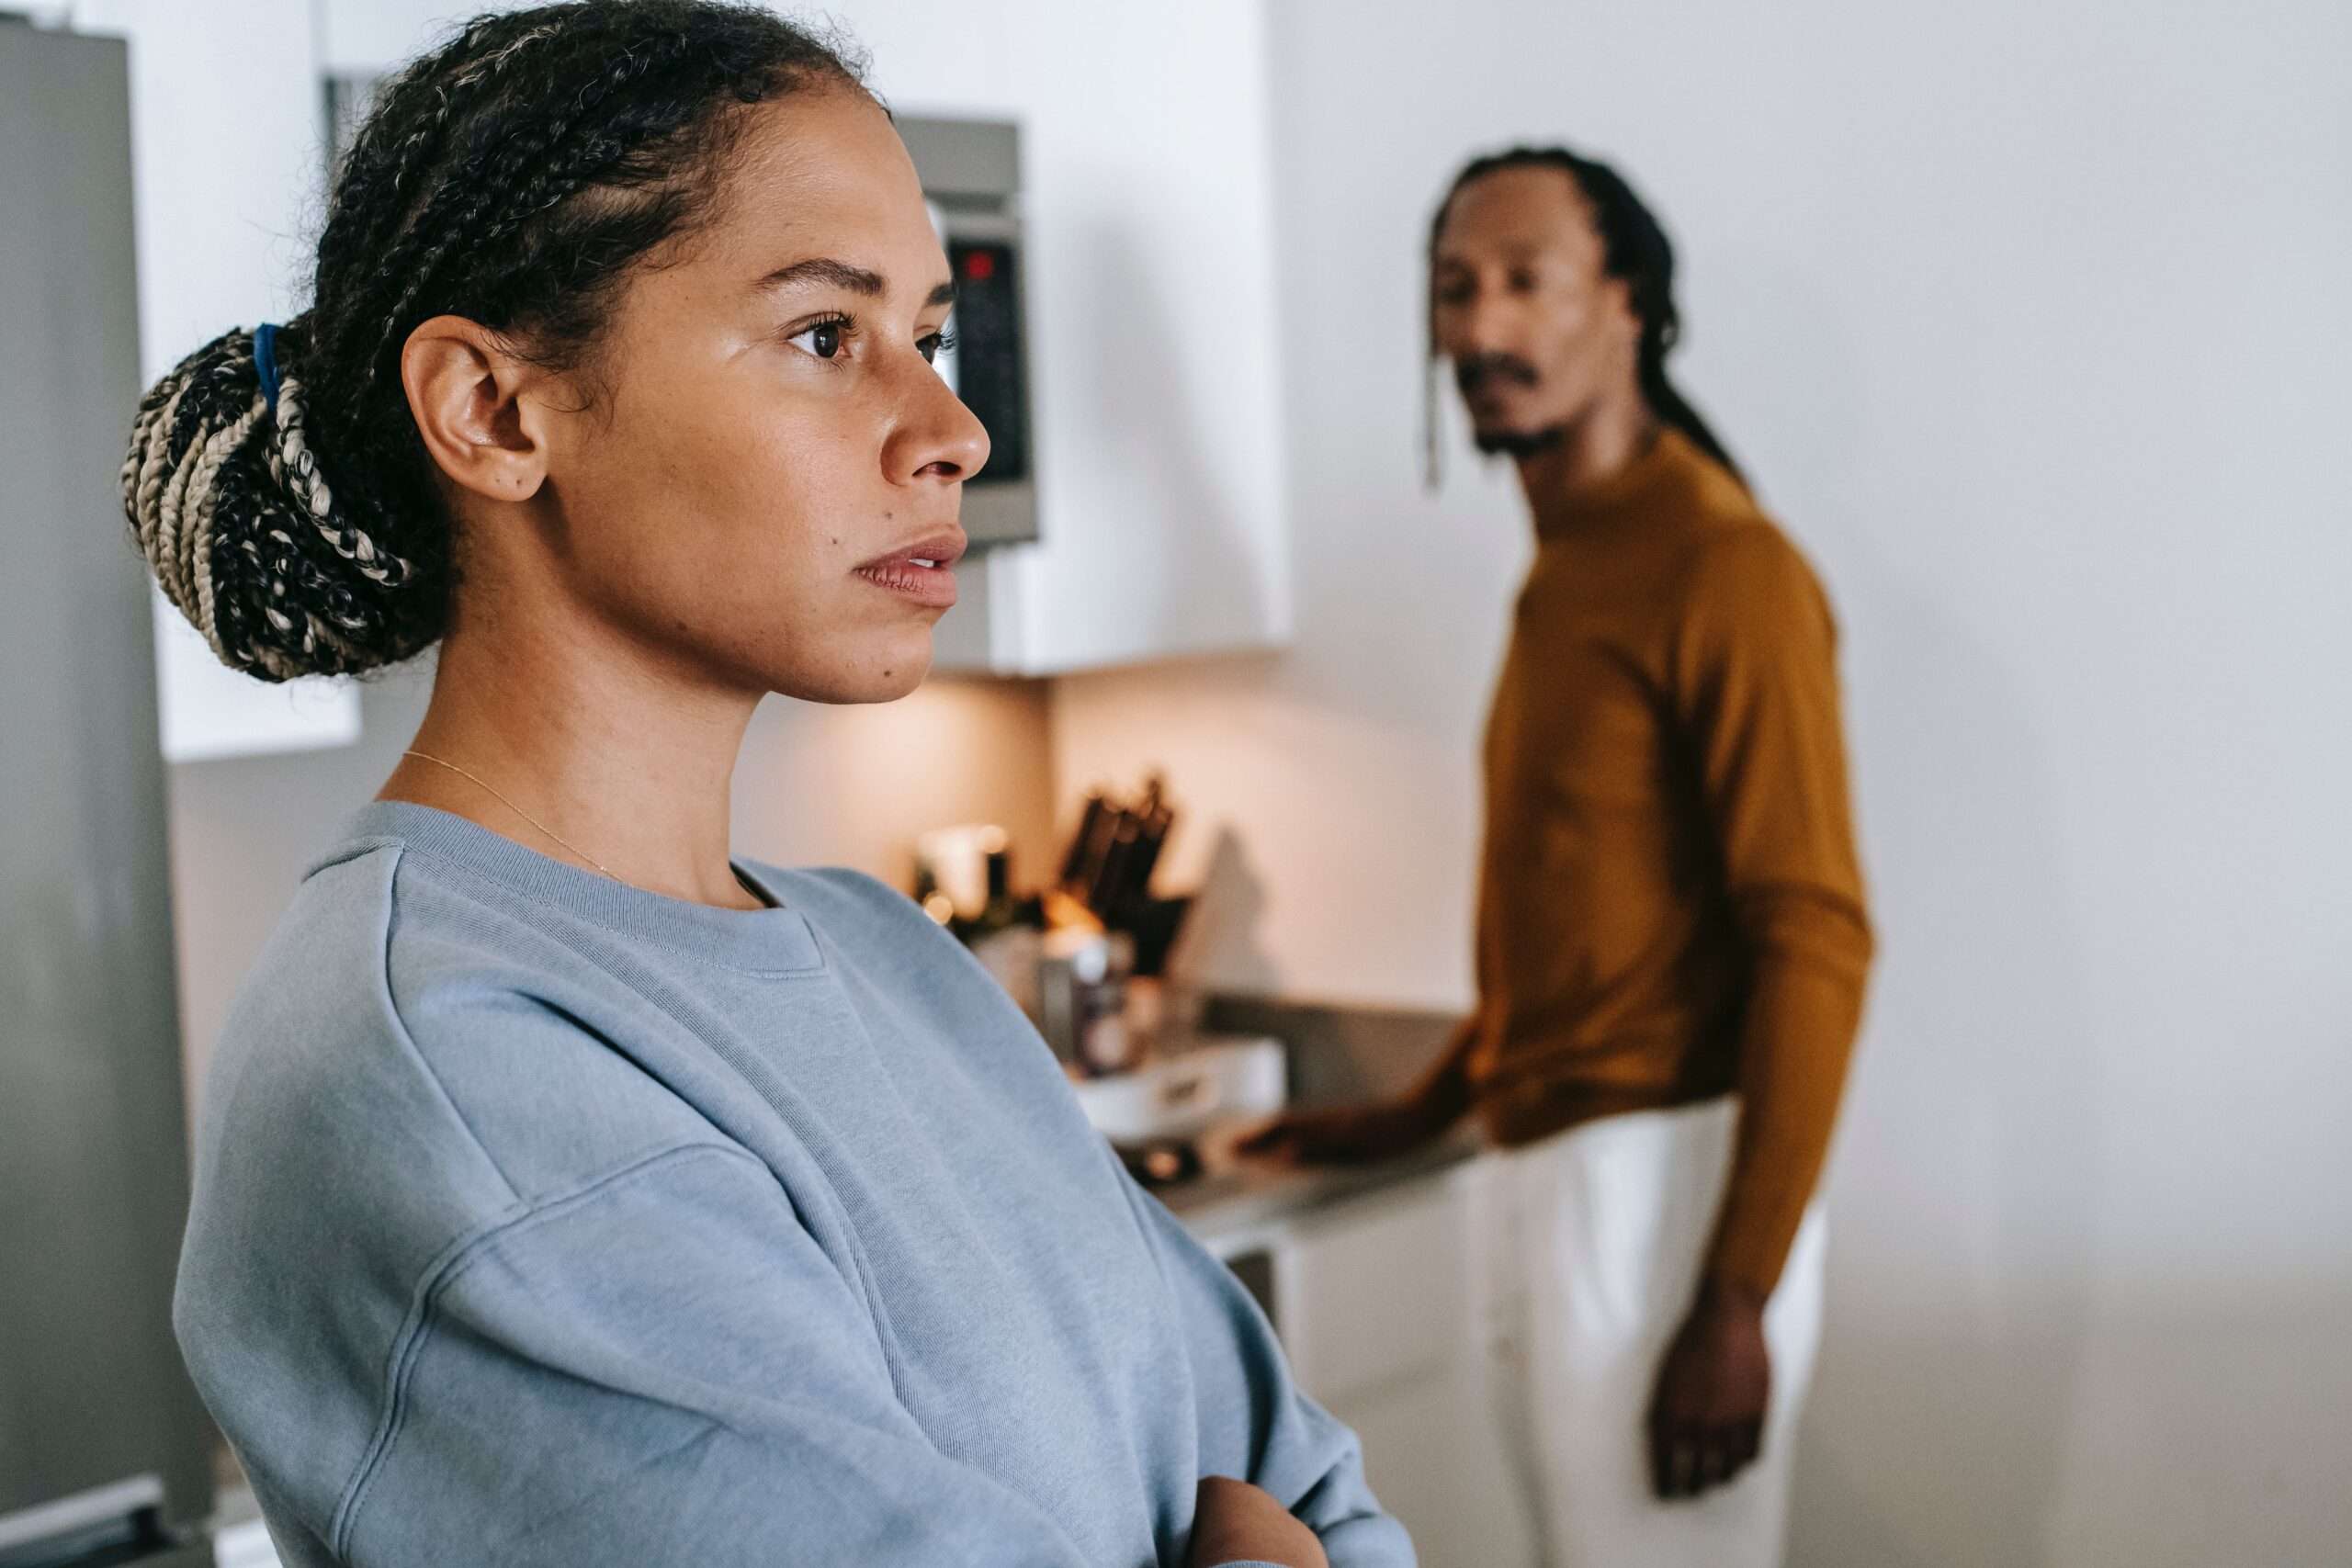 woman in a contemplative pose, with a man in the background, representing the double standard in emotional expression between genders. Get Closure From a Narcissist, narcissists have a shallow personality